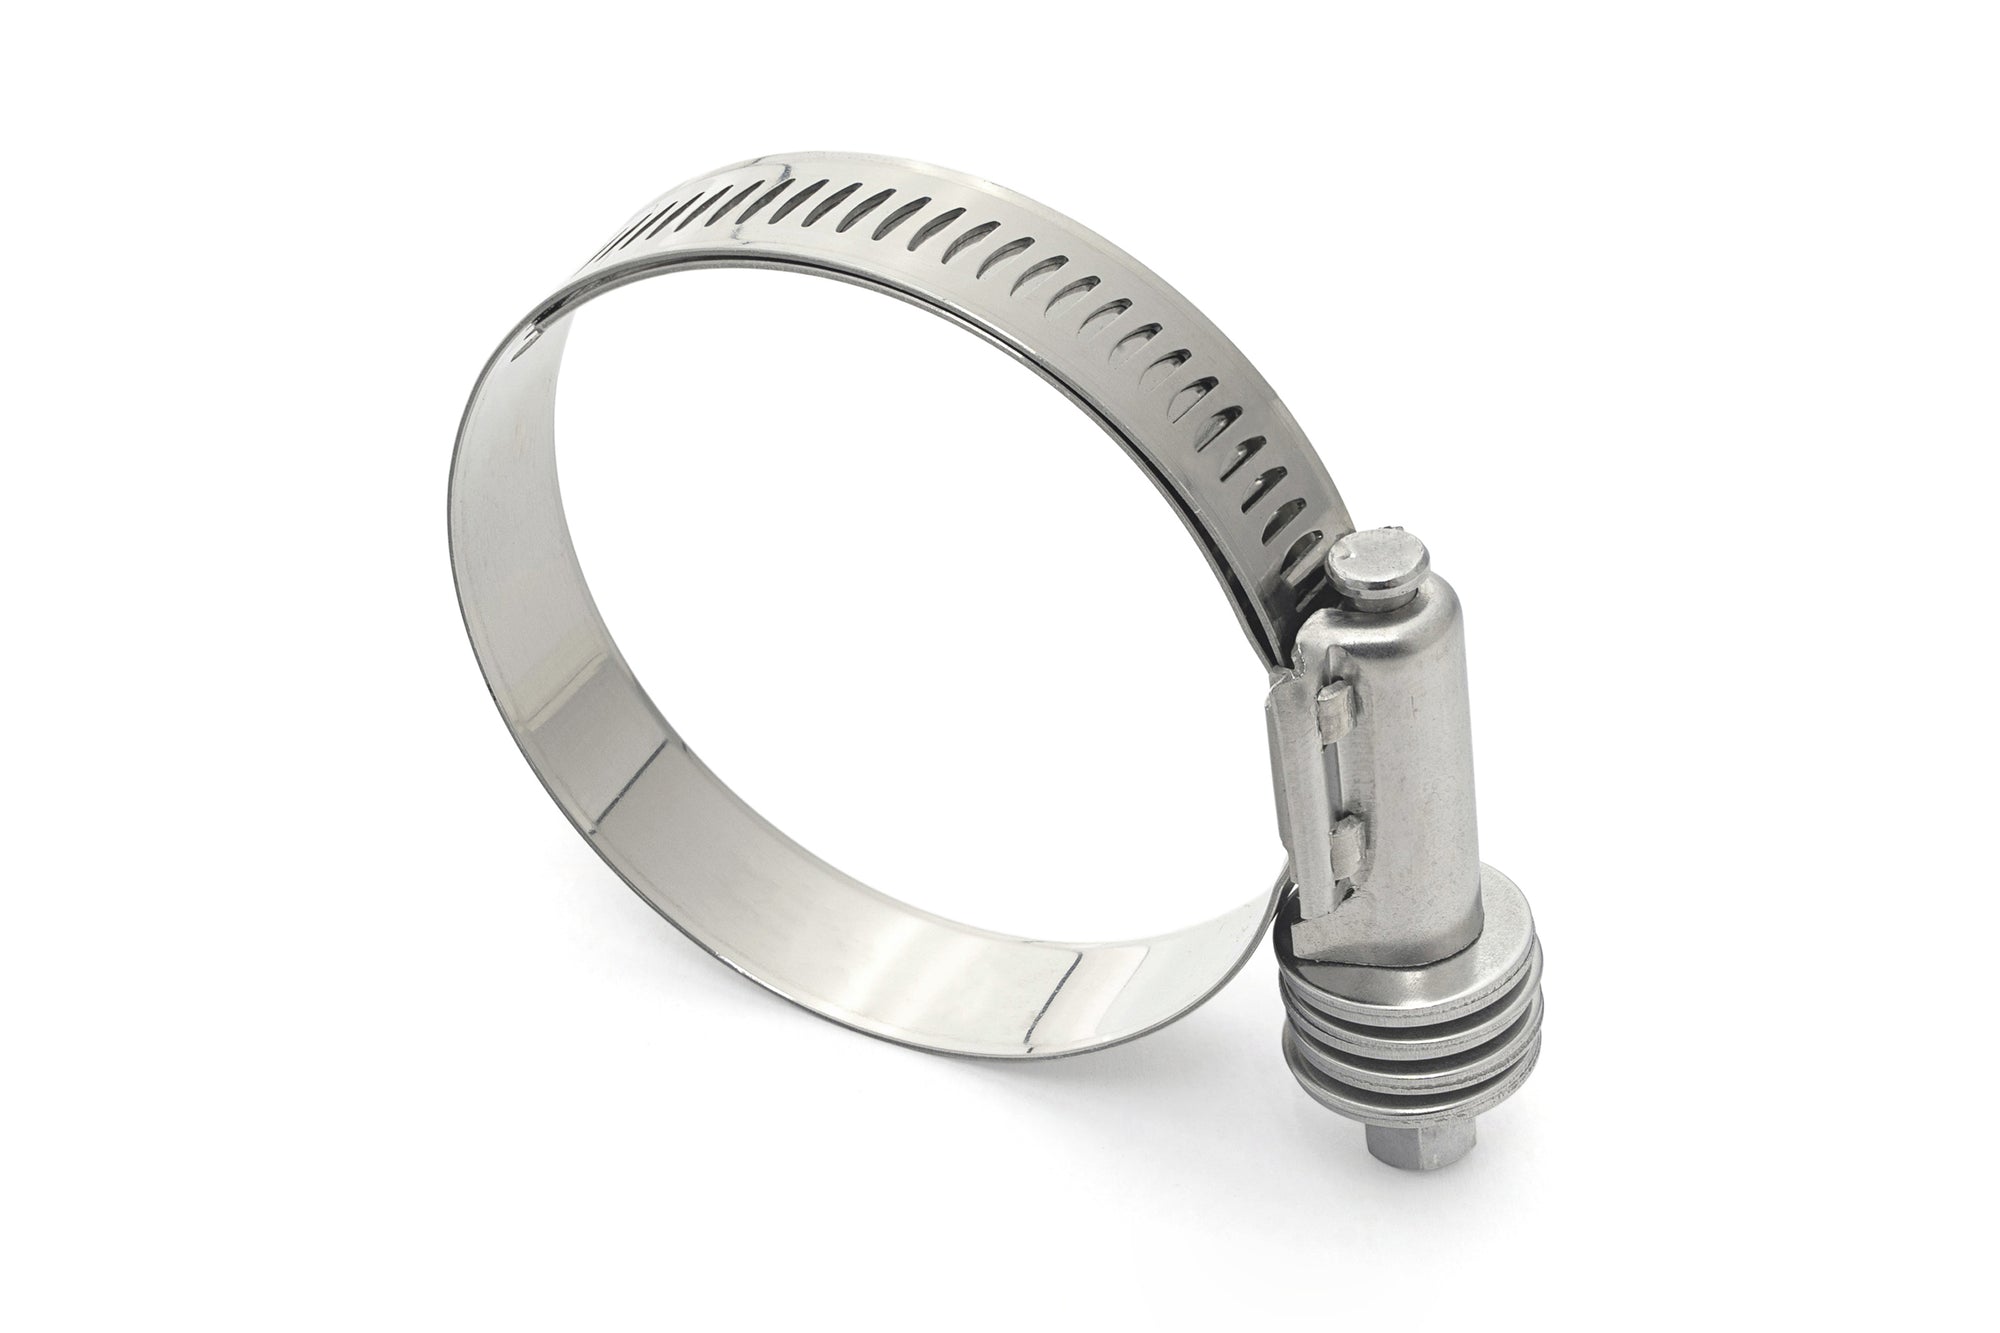 HPS Stainless Steel Constant Torque Hose Clamp Size # 10 CTF-112 9/16 - 1-1/16 inch 14mm-27mm